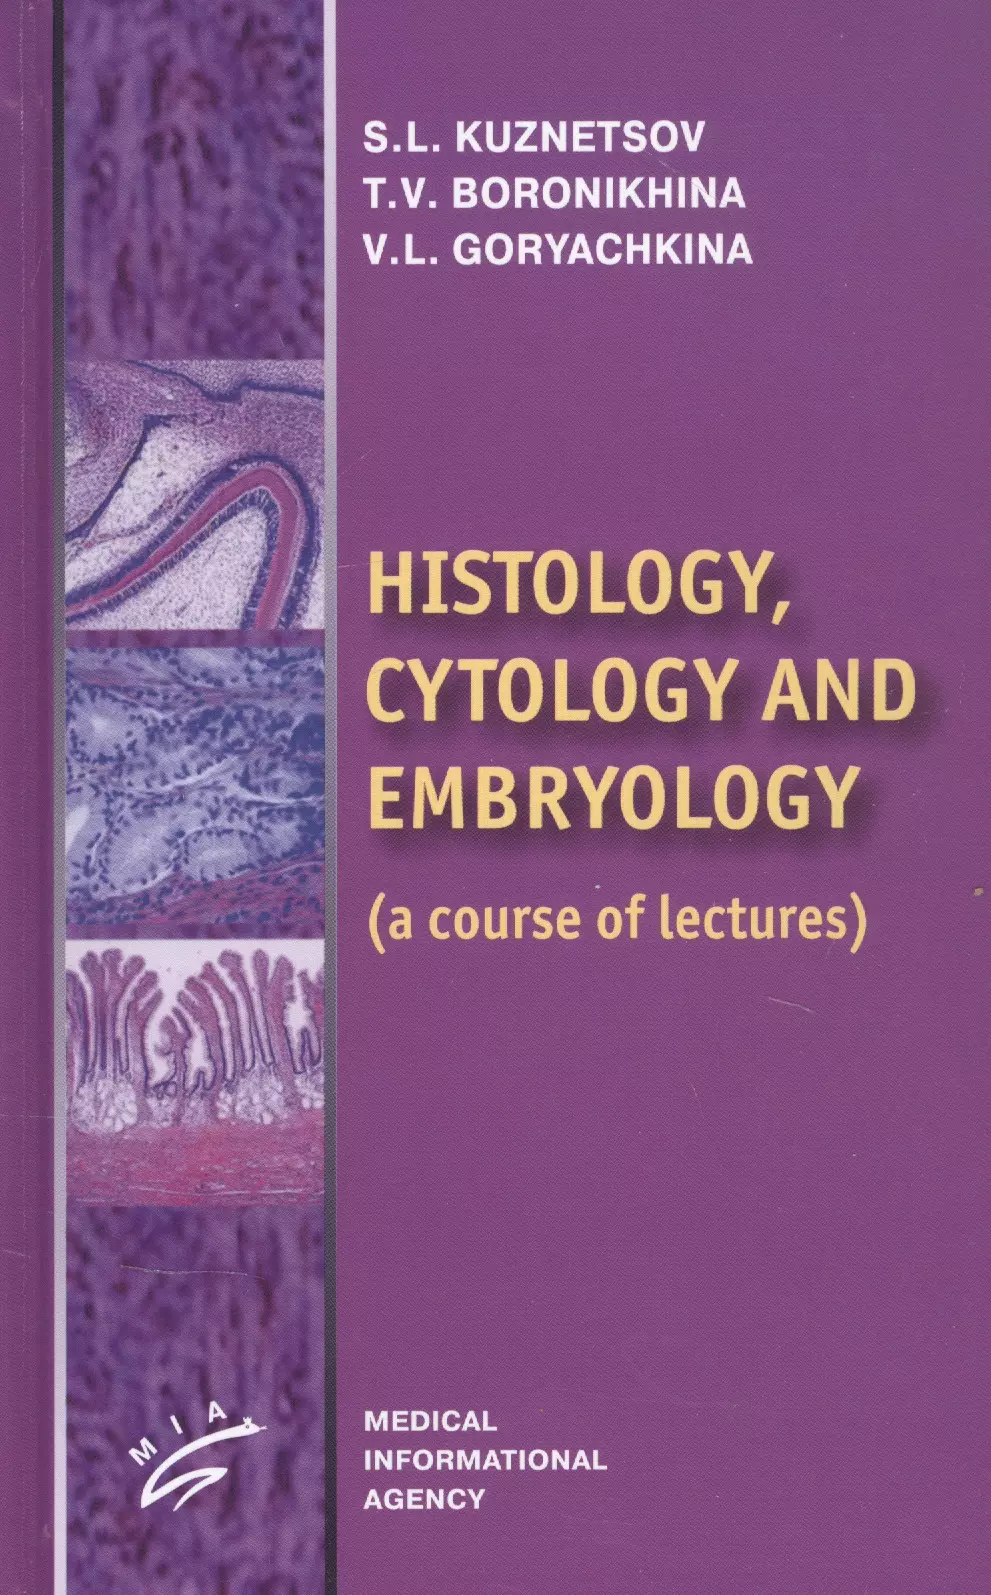 Кузнецов Сергей Львович - Histology, Cytology and Embriology (a course of lectures)